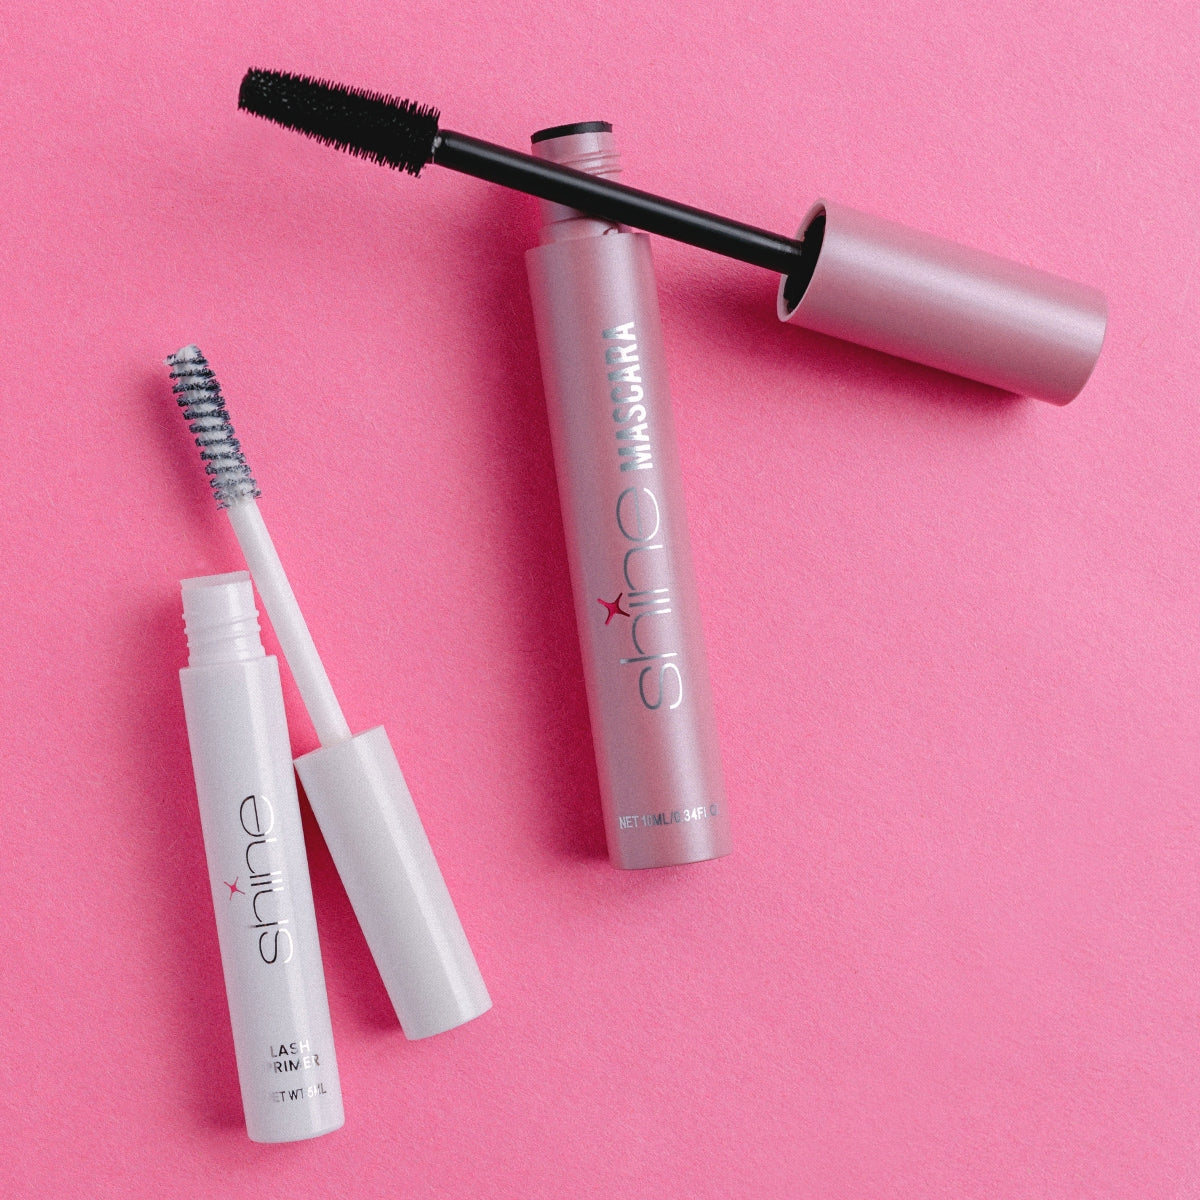 Turns out you do need a lash primer-here's why